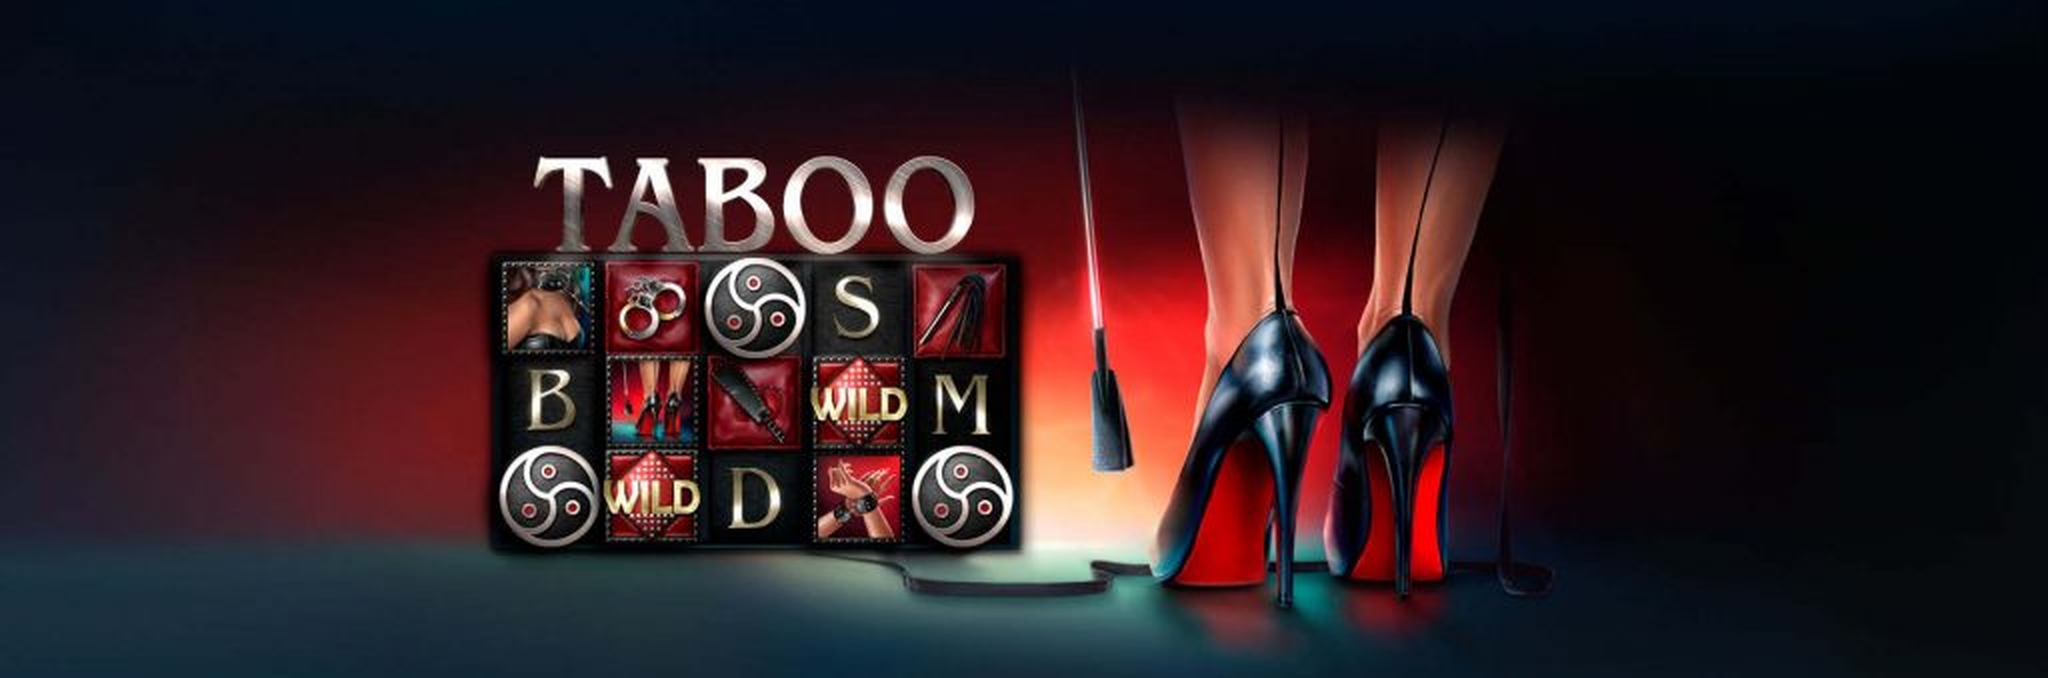 The Taboo Online Slot Demo Game by Endorphina